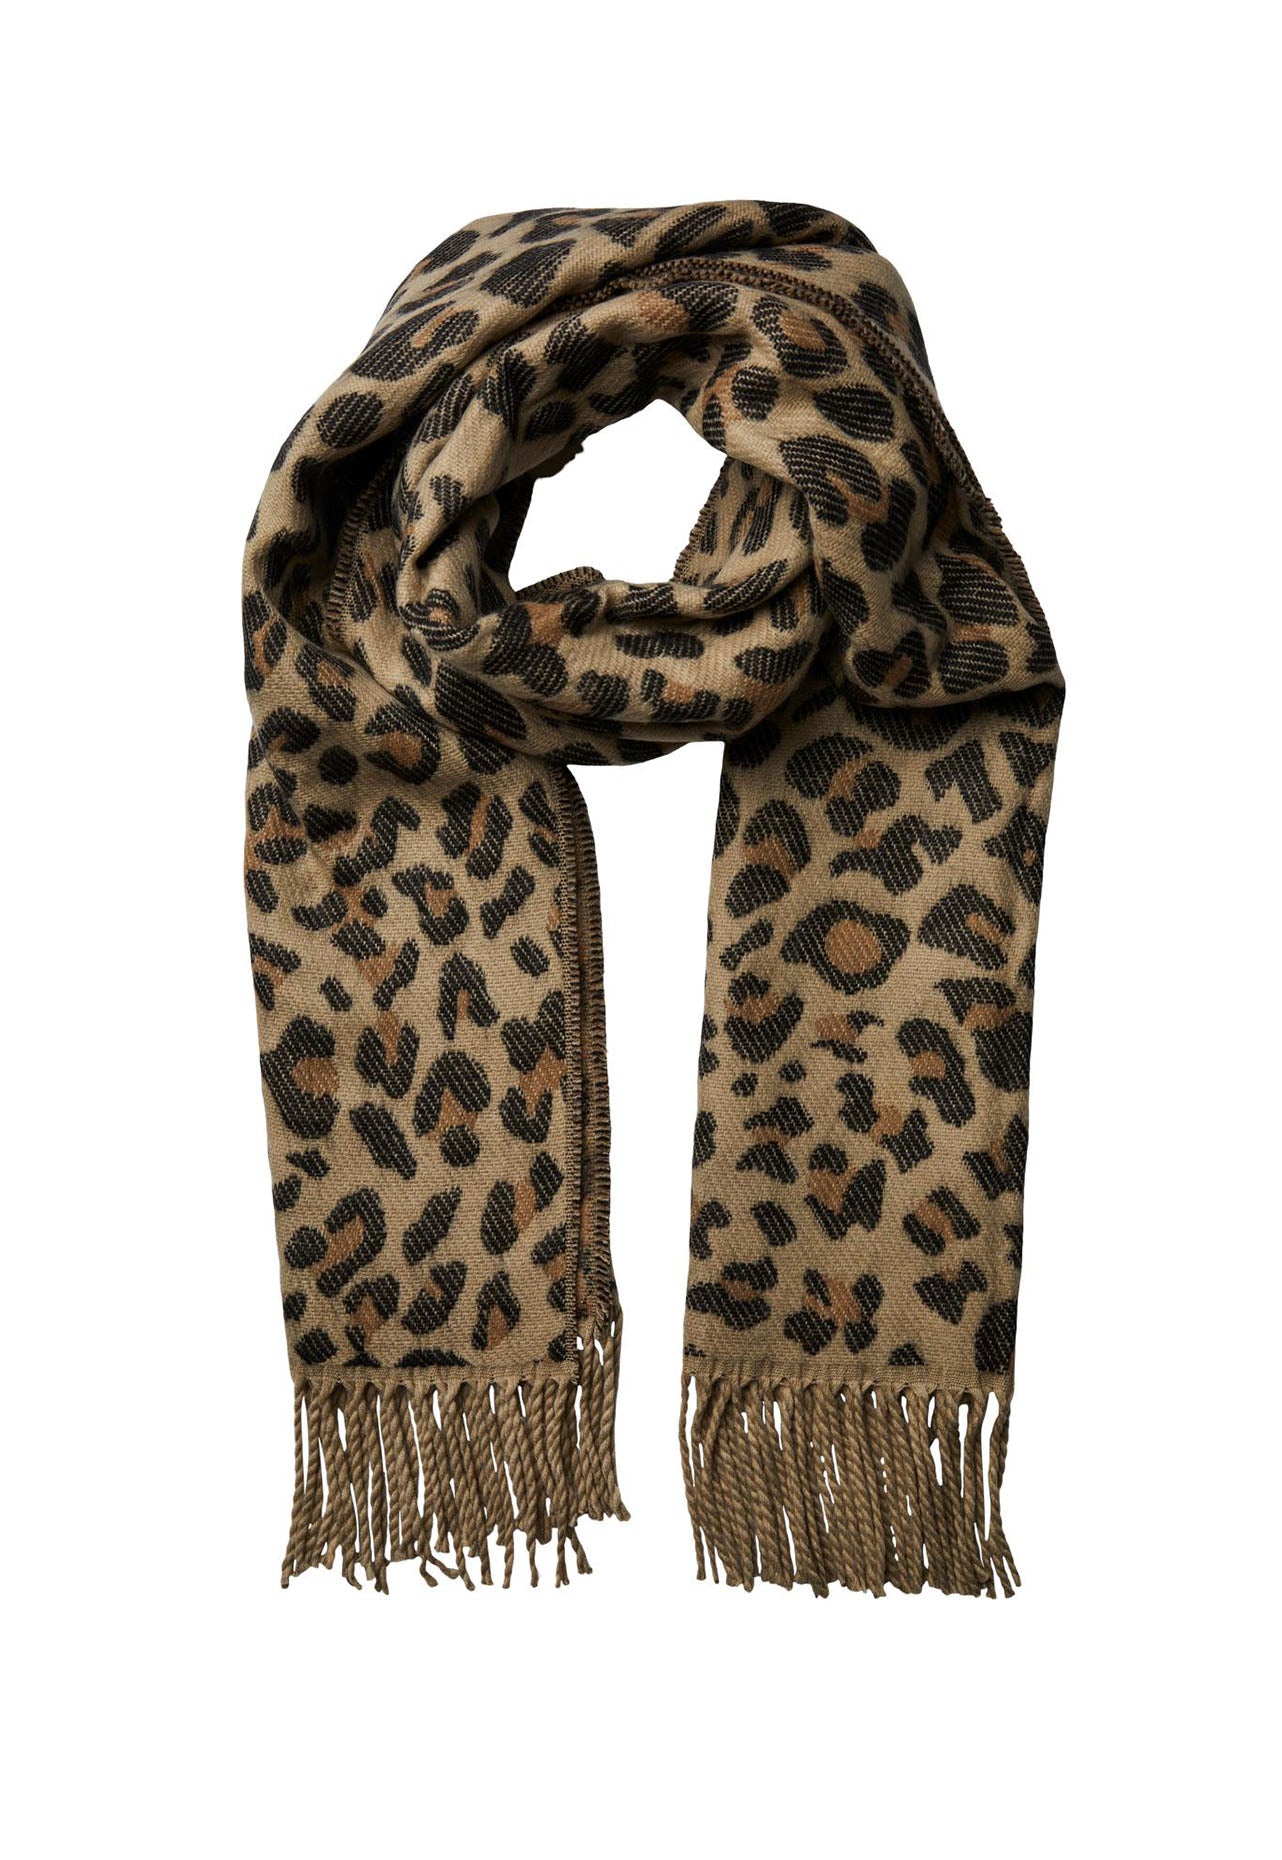 PIECES Leopard Print Oversized Brushed Scarf with Tassels in Beige, Black & Camel - One Nation Clothing